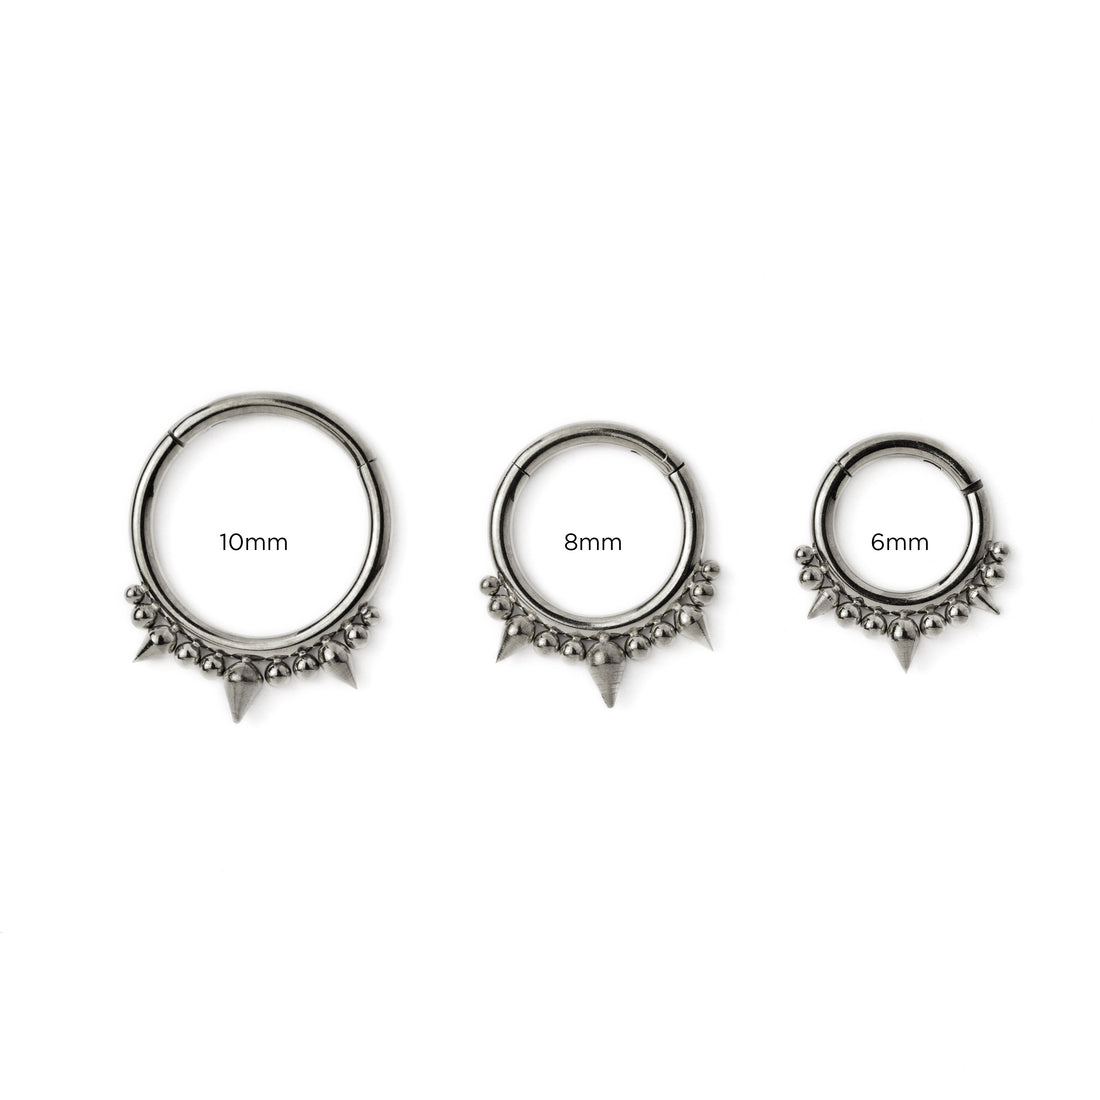 6mm, 8mm, 10mm Debra surgical steel septum clicker rings frontal view